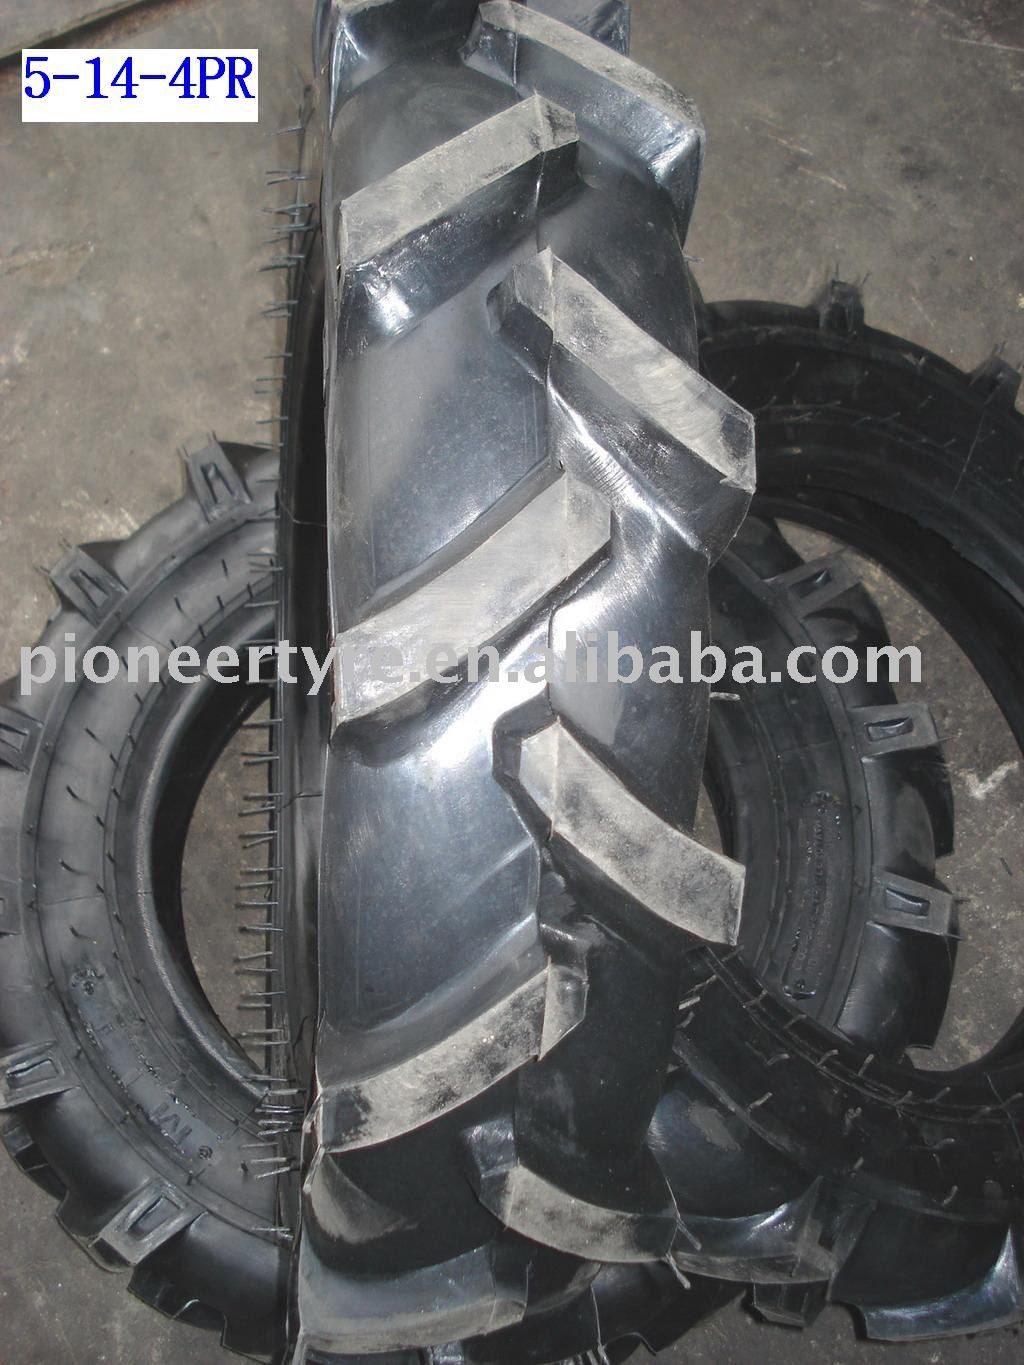 R1 pattern agricultural tire 5-14